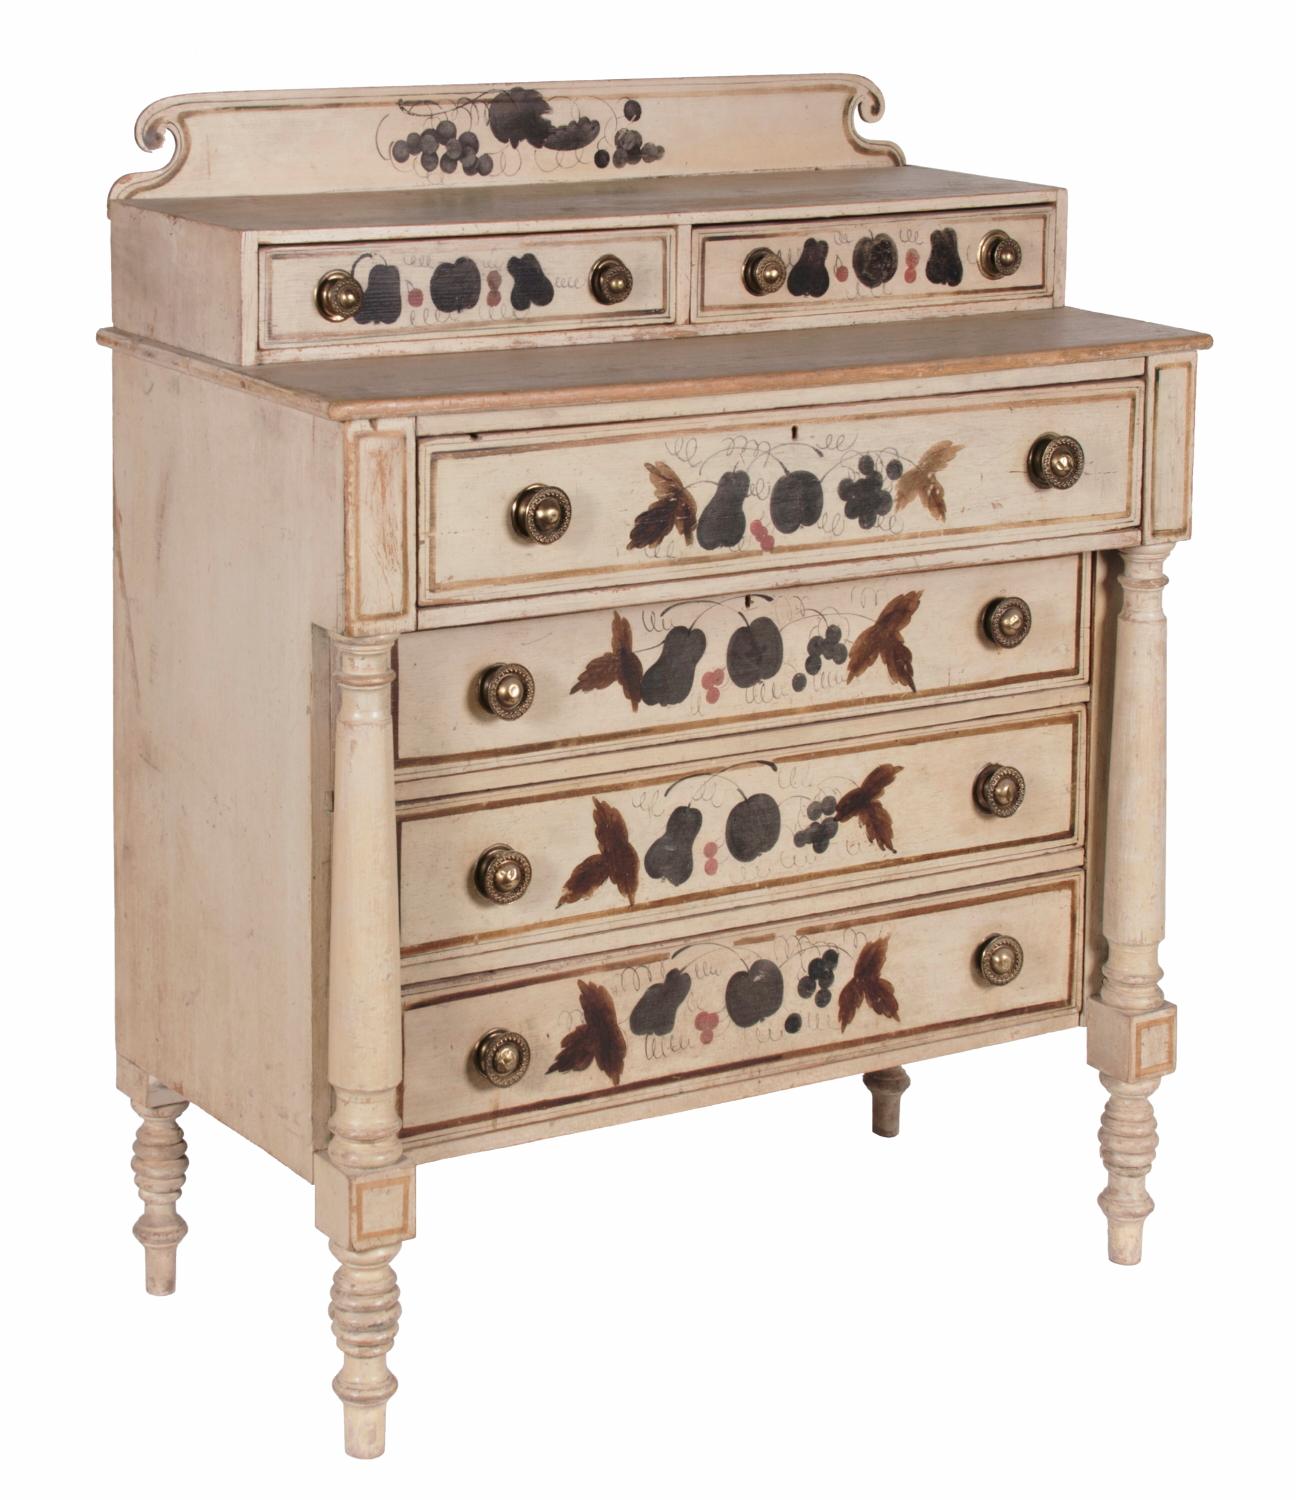 Country Sheraton transitional chest of drawers with stenciled and hand painted decoration on a white ground, maine origin, circa 1830-1850

Paint-decorated chest of two over four drawers, with a rams' Horn, scrollwork, splash back and full